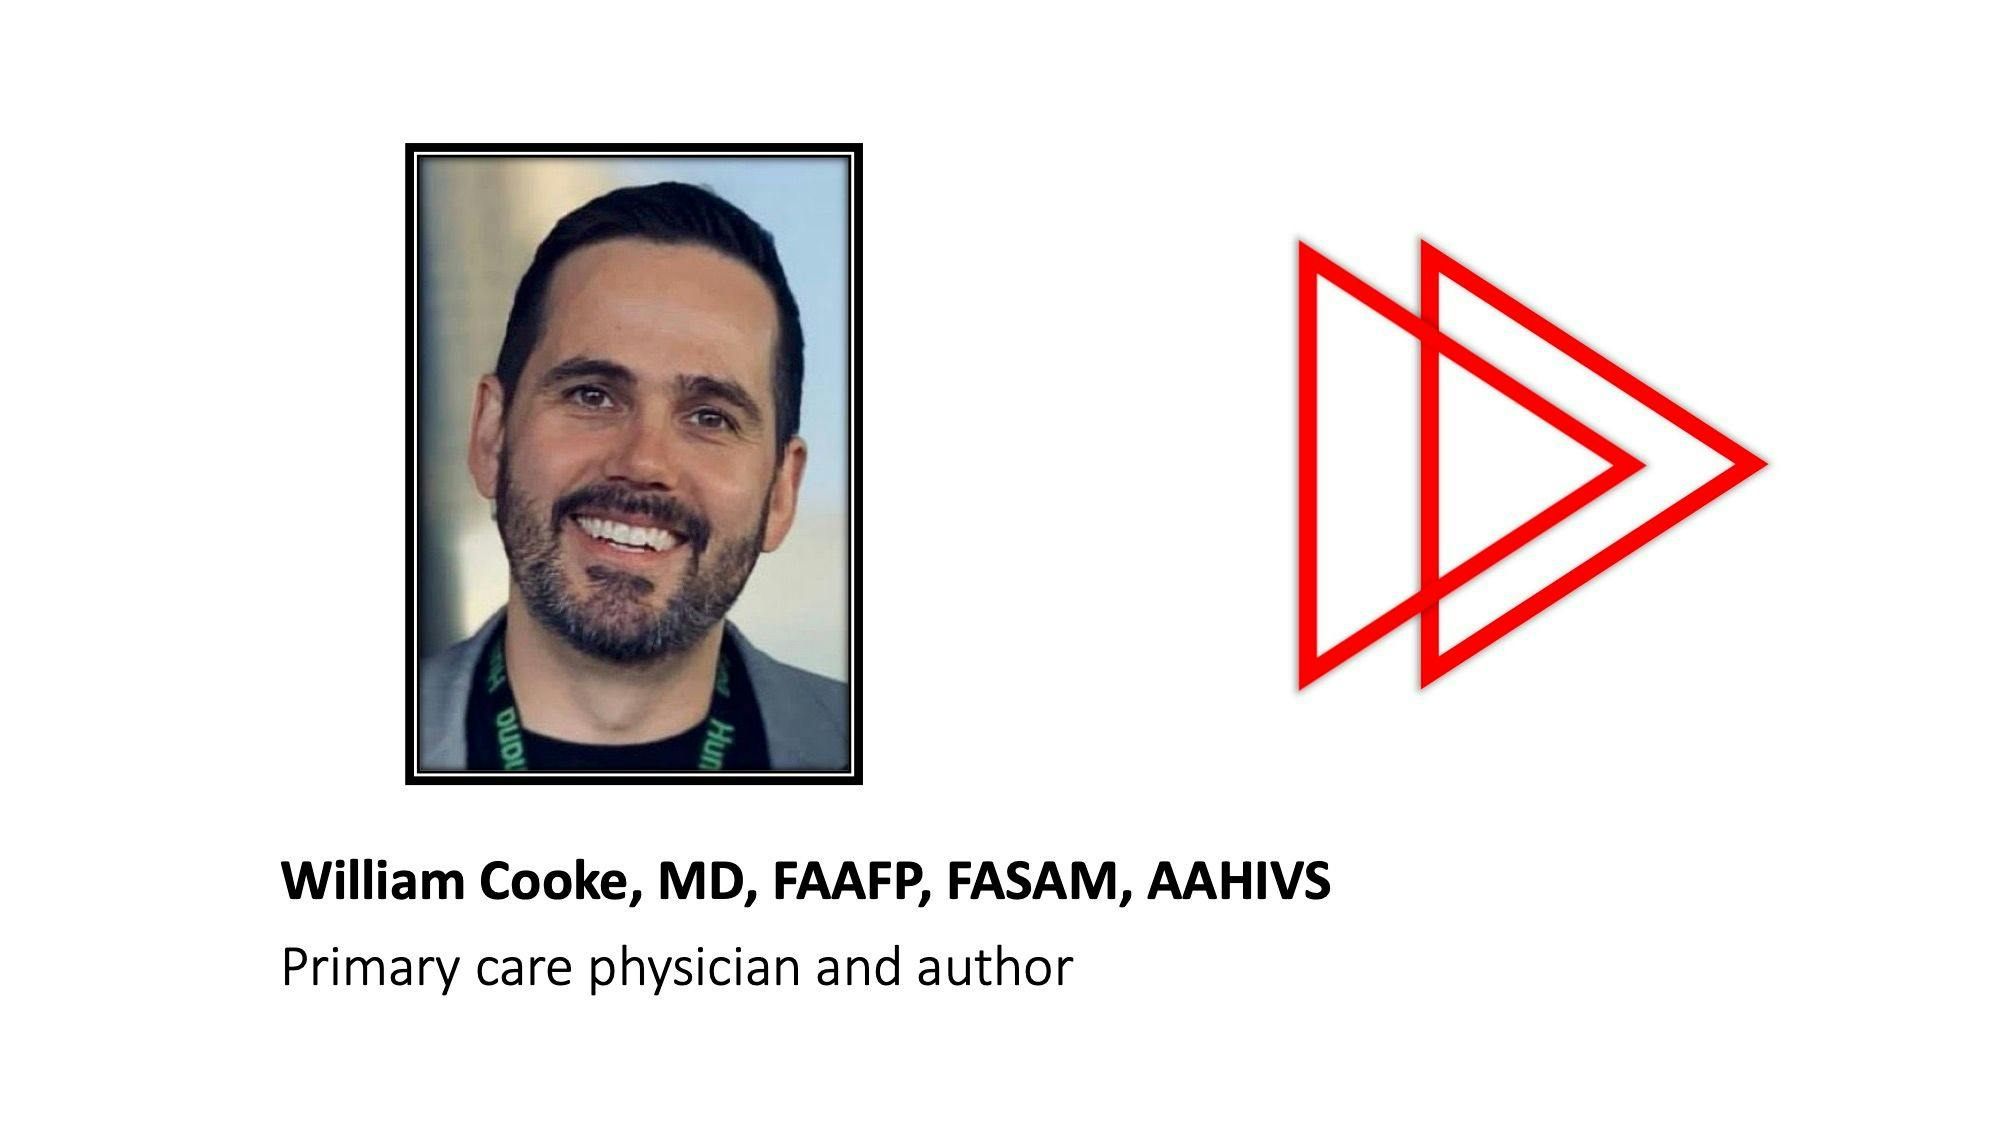 William Cooke, MD, FAAFP, FASAM, AAHIVS, gives expert advice